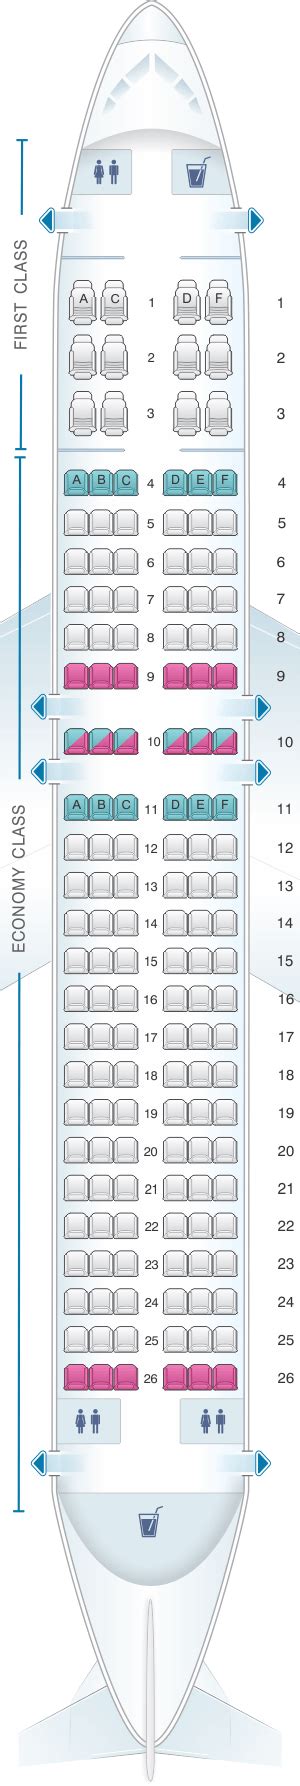 Airbus Industrie A321 Sharklets American Airlines Seating Chart